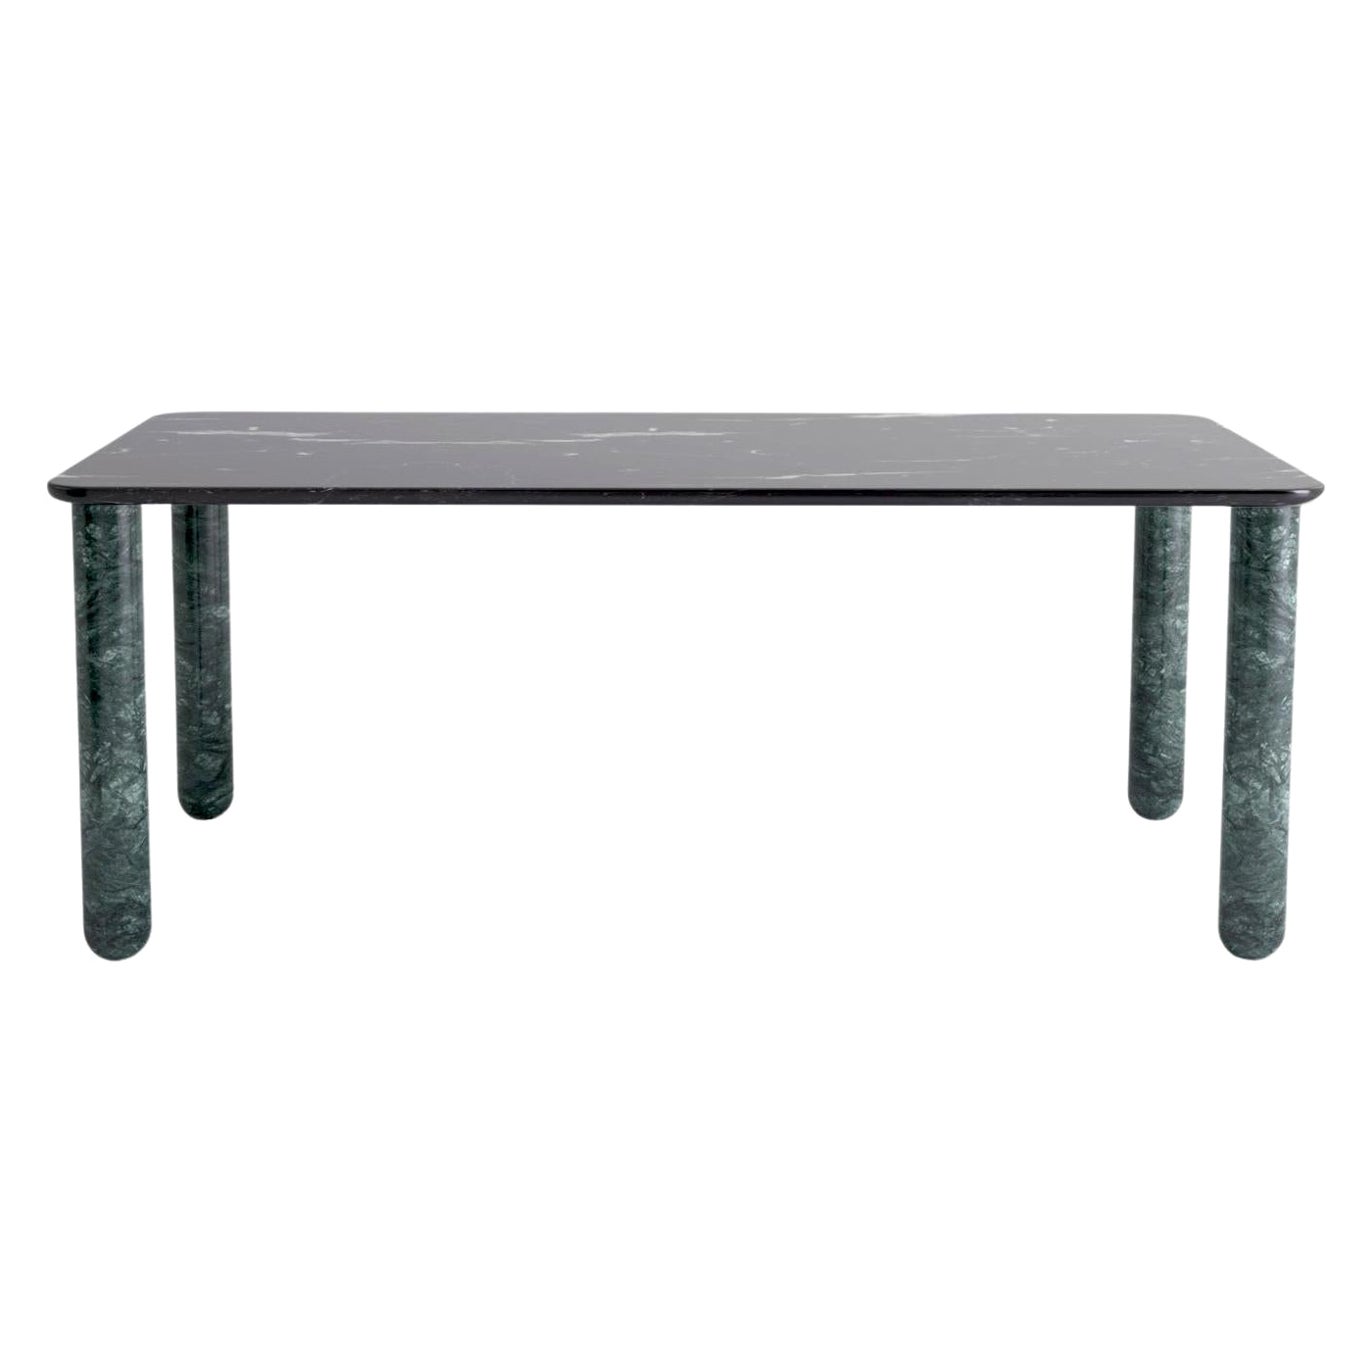 X Large Black and Green Marble "Sunday" Dining Table, Jean-Baptiste Souletie For Sale